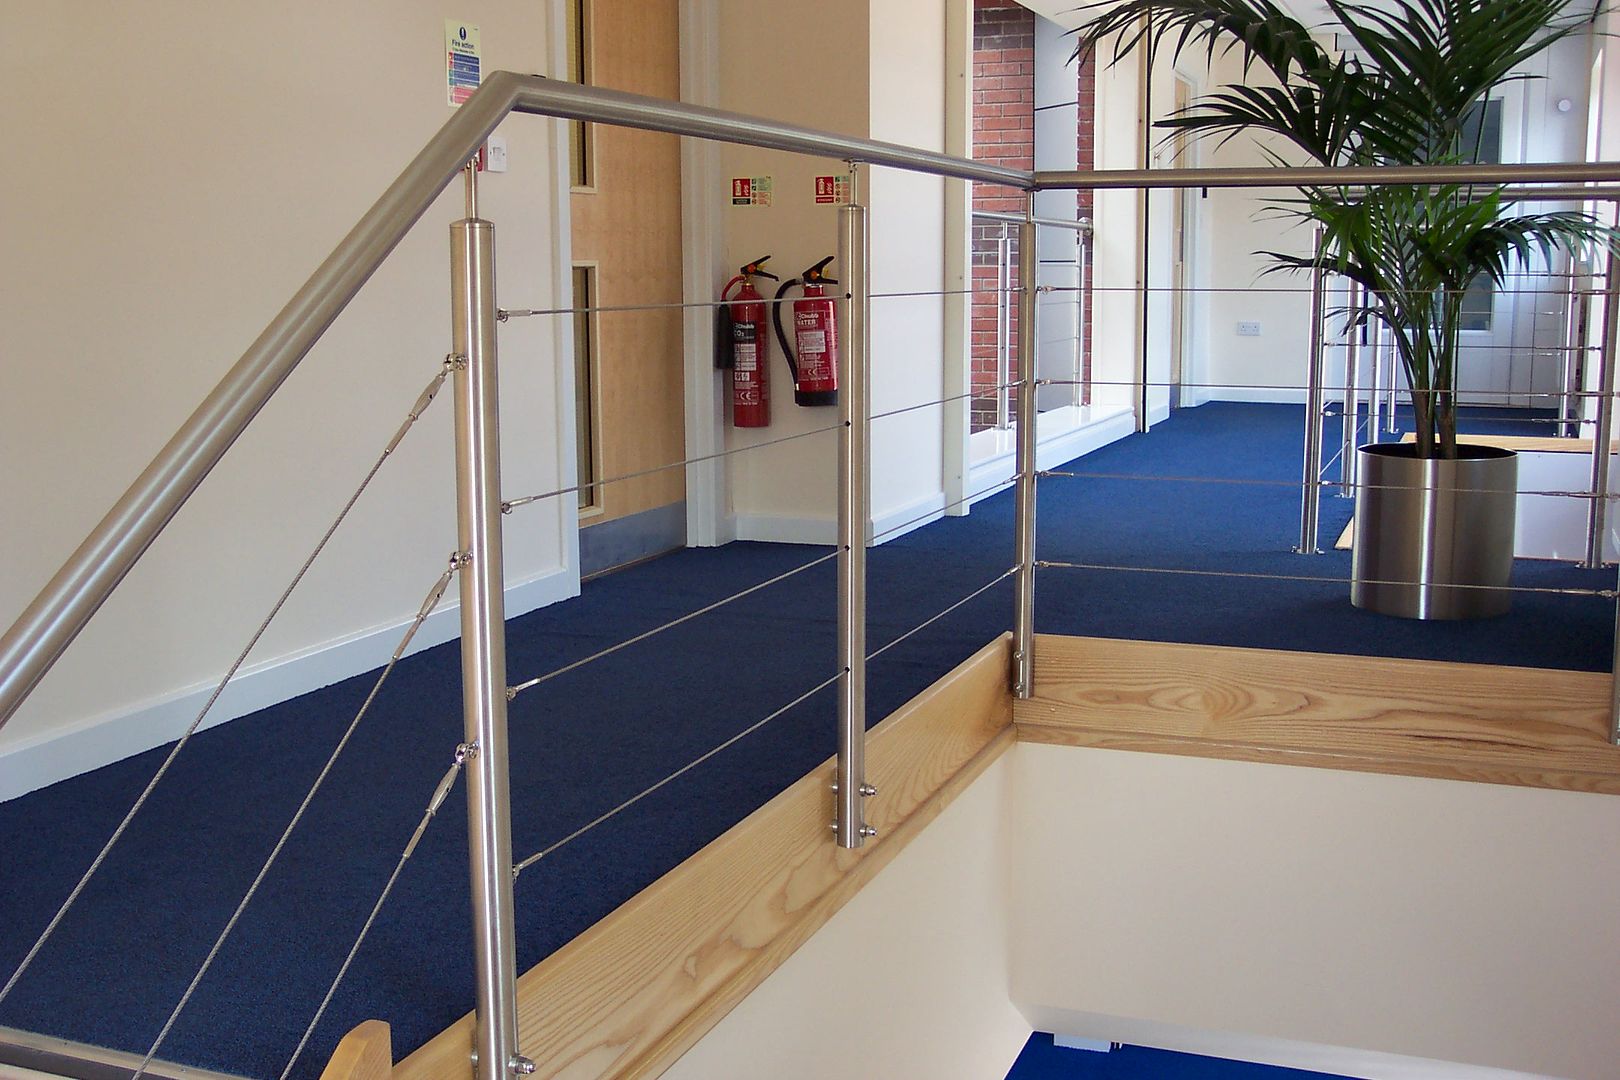 Stainless steel balustrade with wire infills and tubular posts